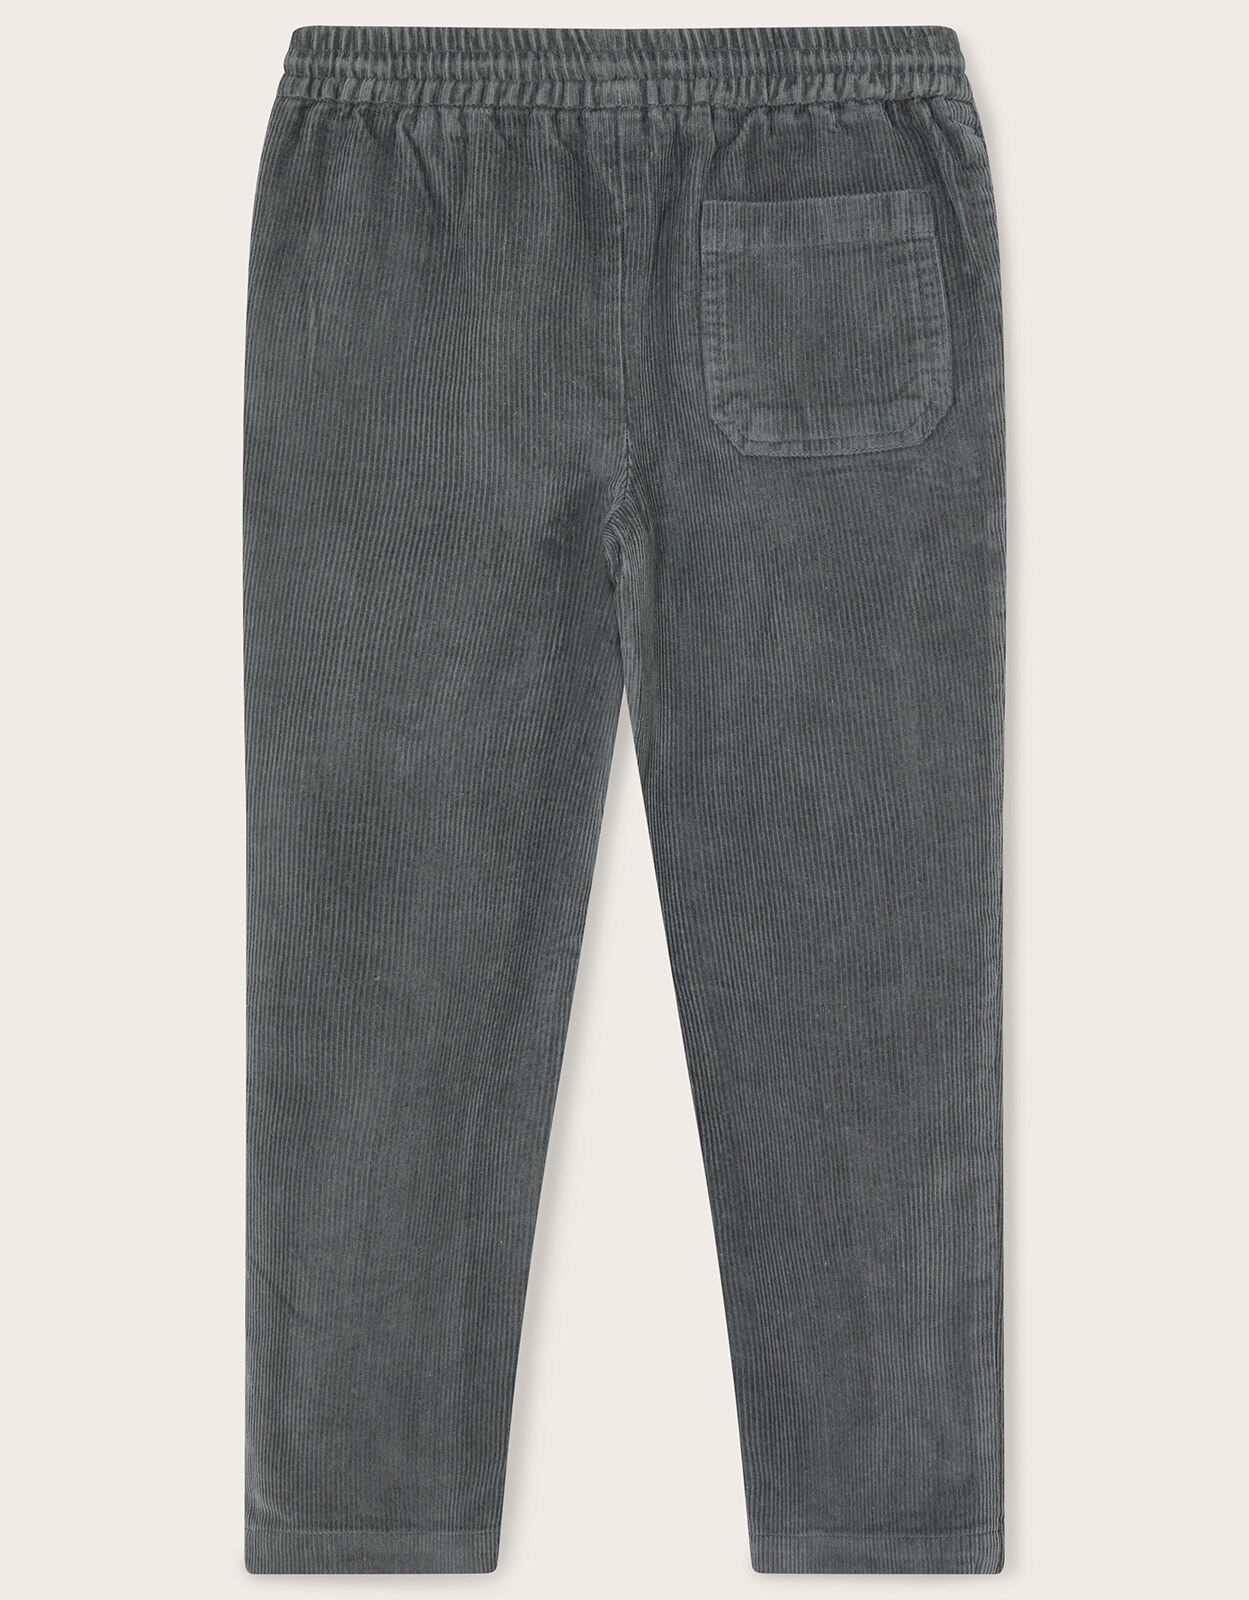 Dondup Corduroy Trousers for Men sale - discounted price | FASHIOLA.in